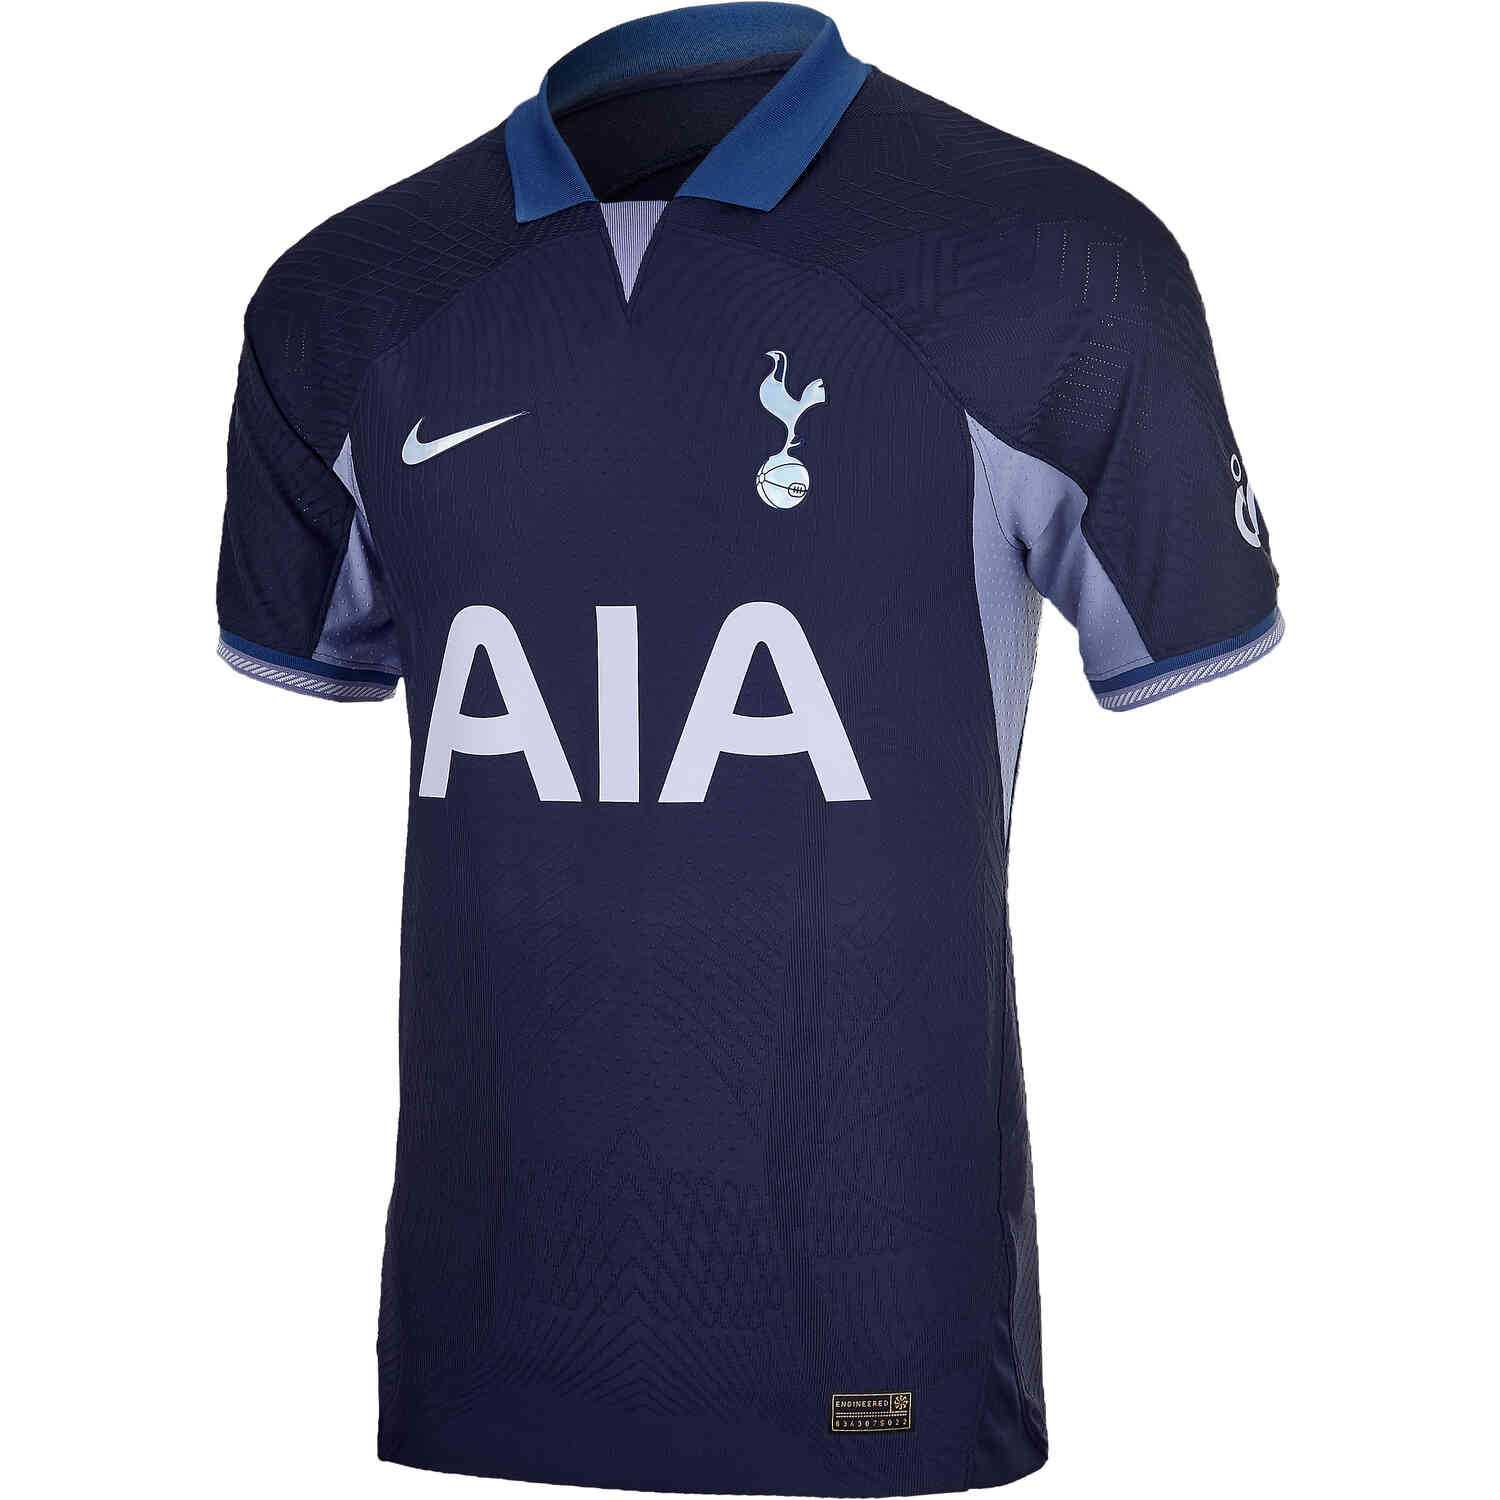 spurs youth kit size guide